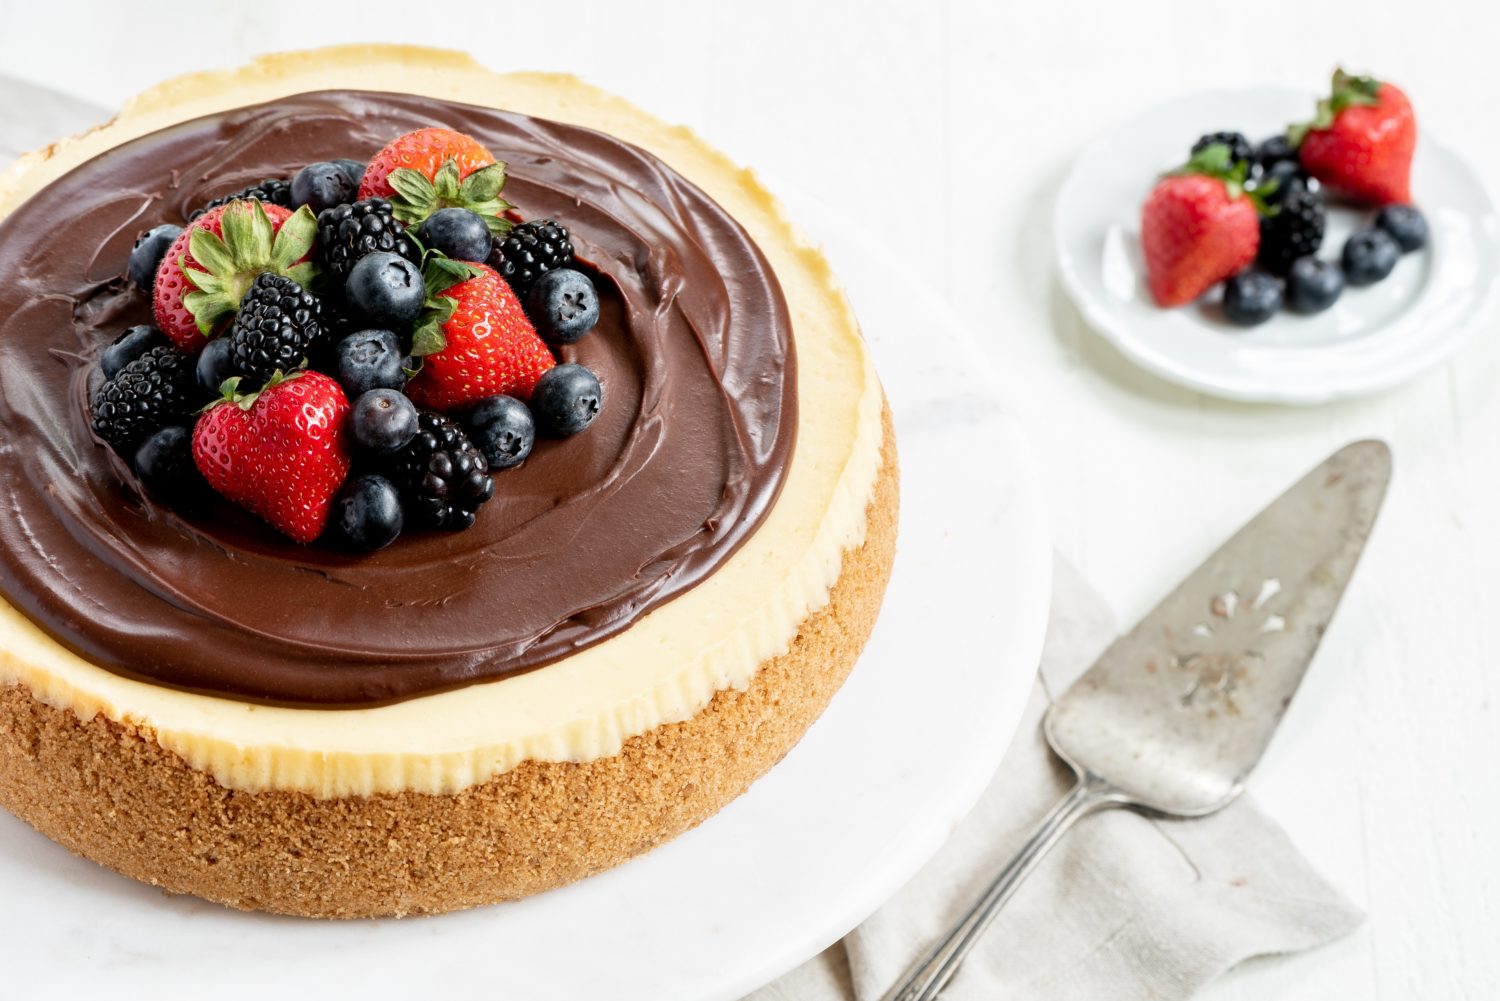 cheesecake with chocolate frosting on top and assorted berries as garnish